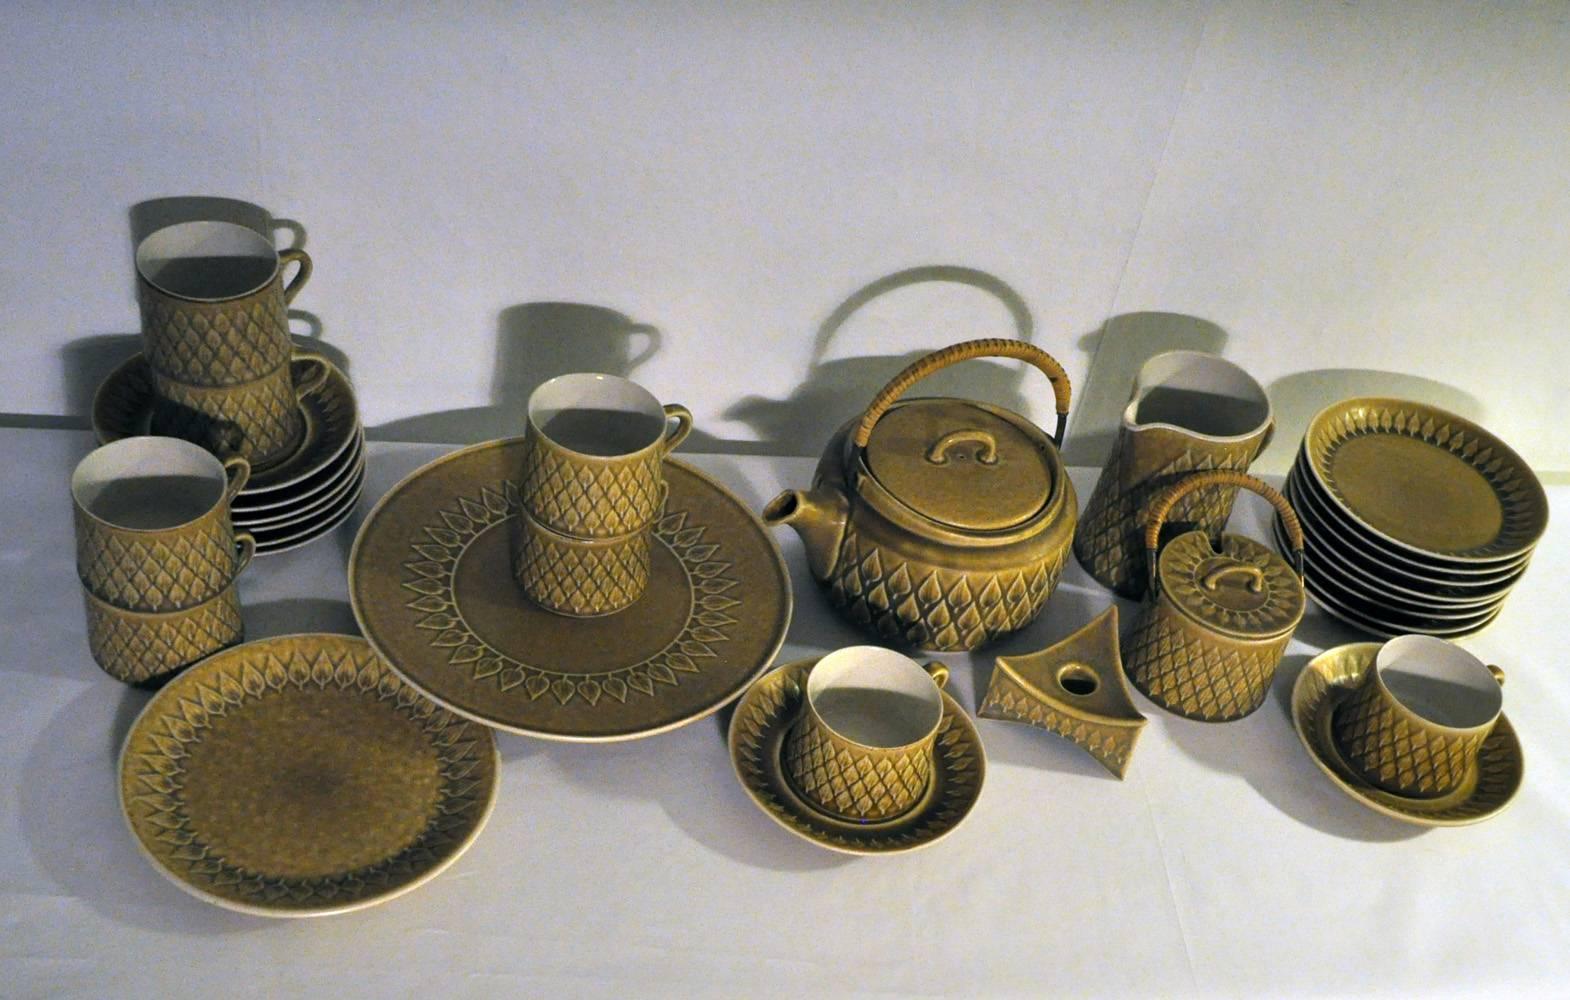 Jens H. Quistgaard table wear set. This relief set was manufactured by Kronjyden in the 1960s. Kronjyden was the first producer of relief.

Kronjyden was founded in 1937 and was especially successful in the 1960s. Jens H. Quistgaard designed